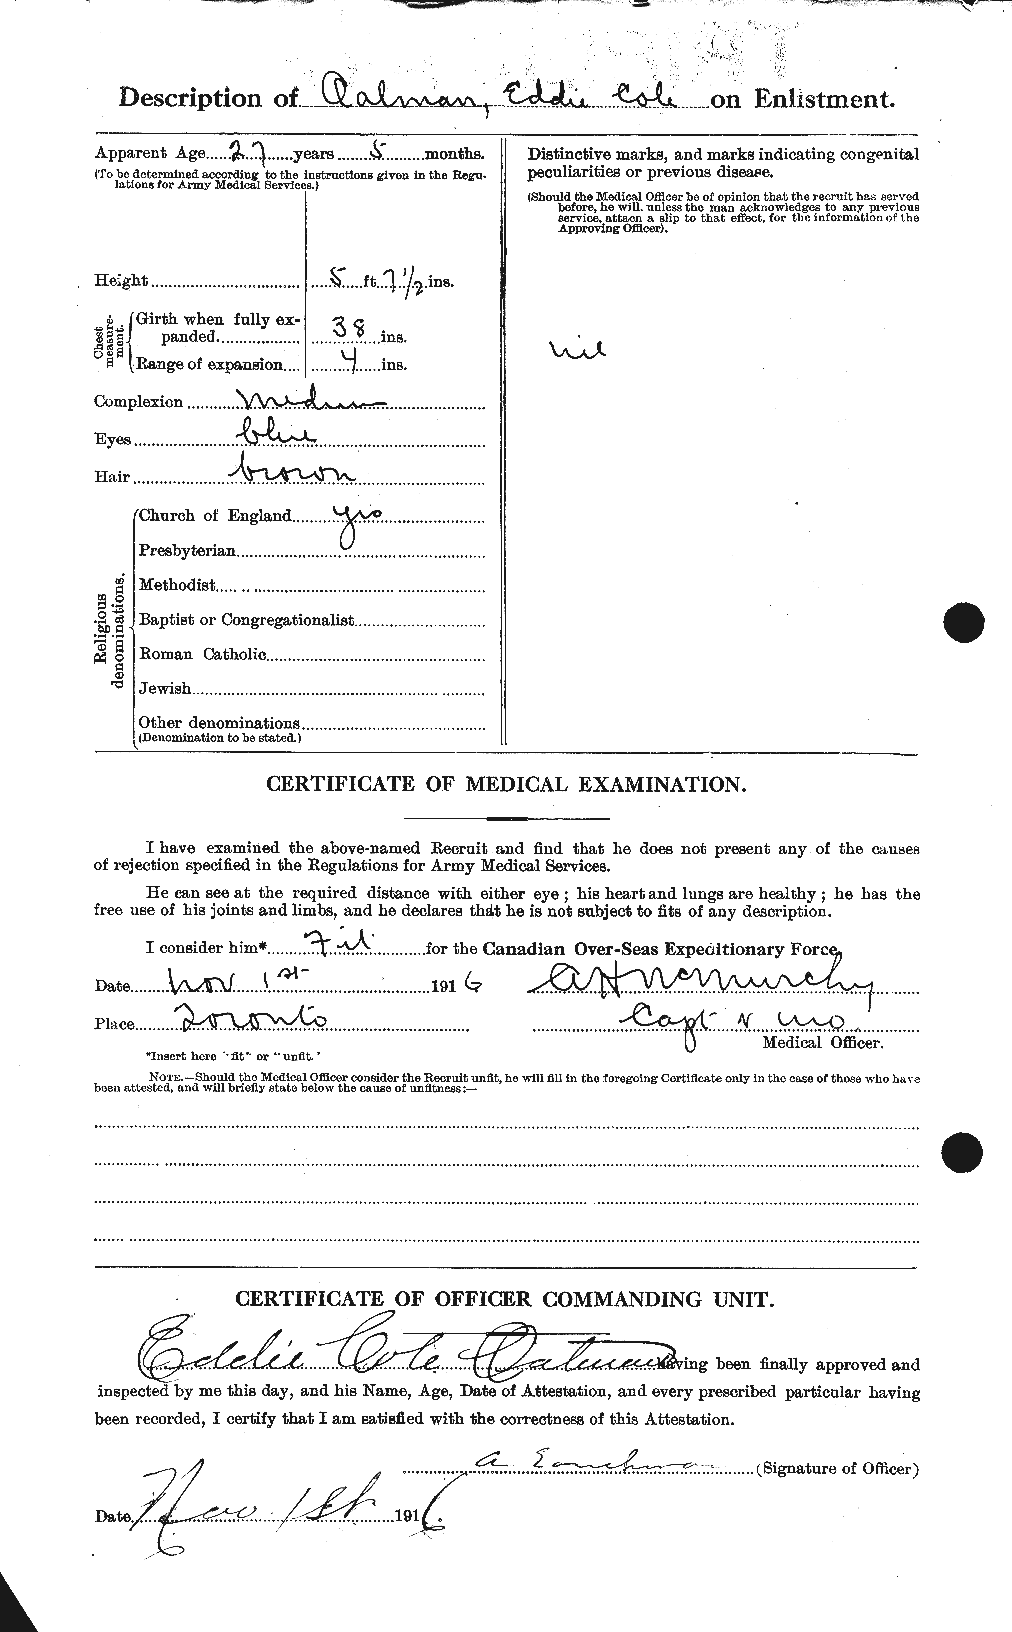 Personnel Records of the First World War - CEF 552568b